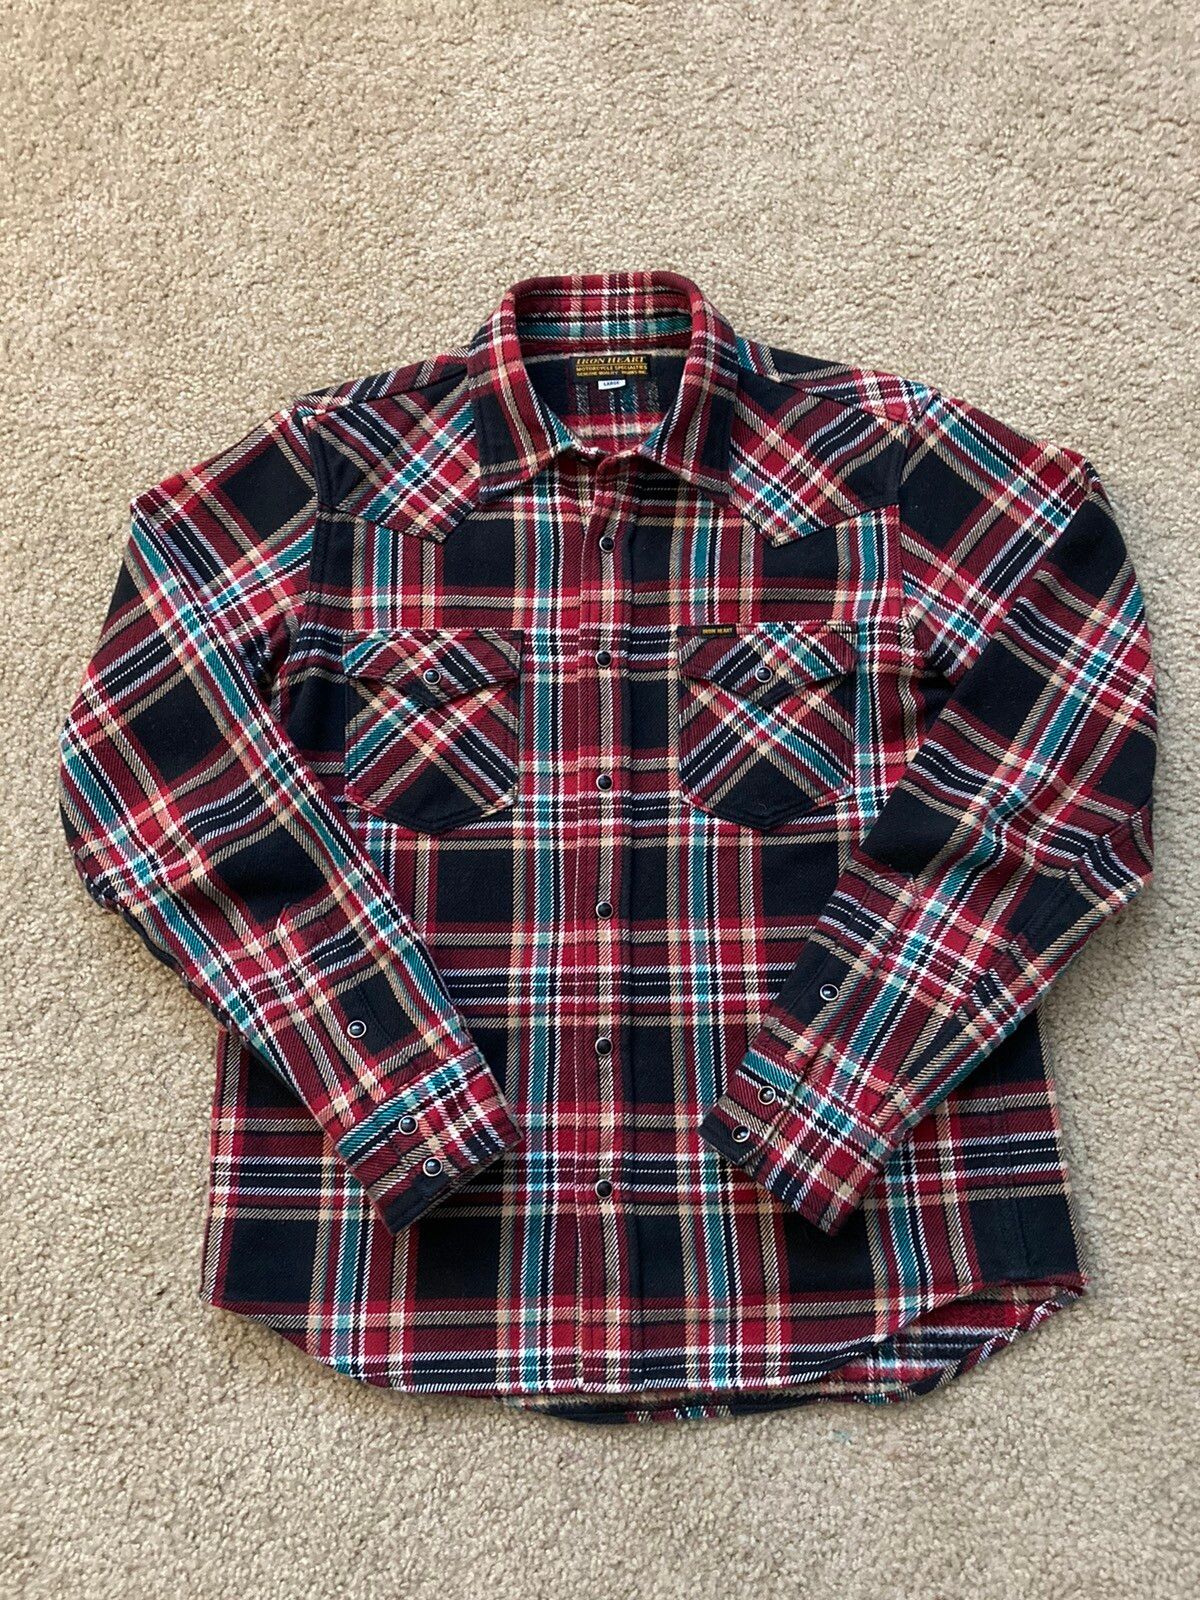 Iron Heart IHSH-237 Flannel Size US L / EU 52-54 / 3 - 1 Preview